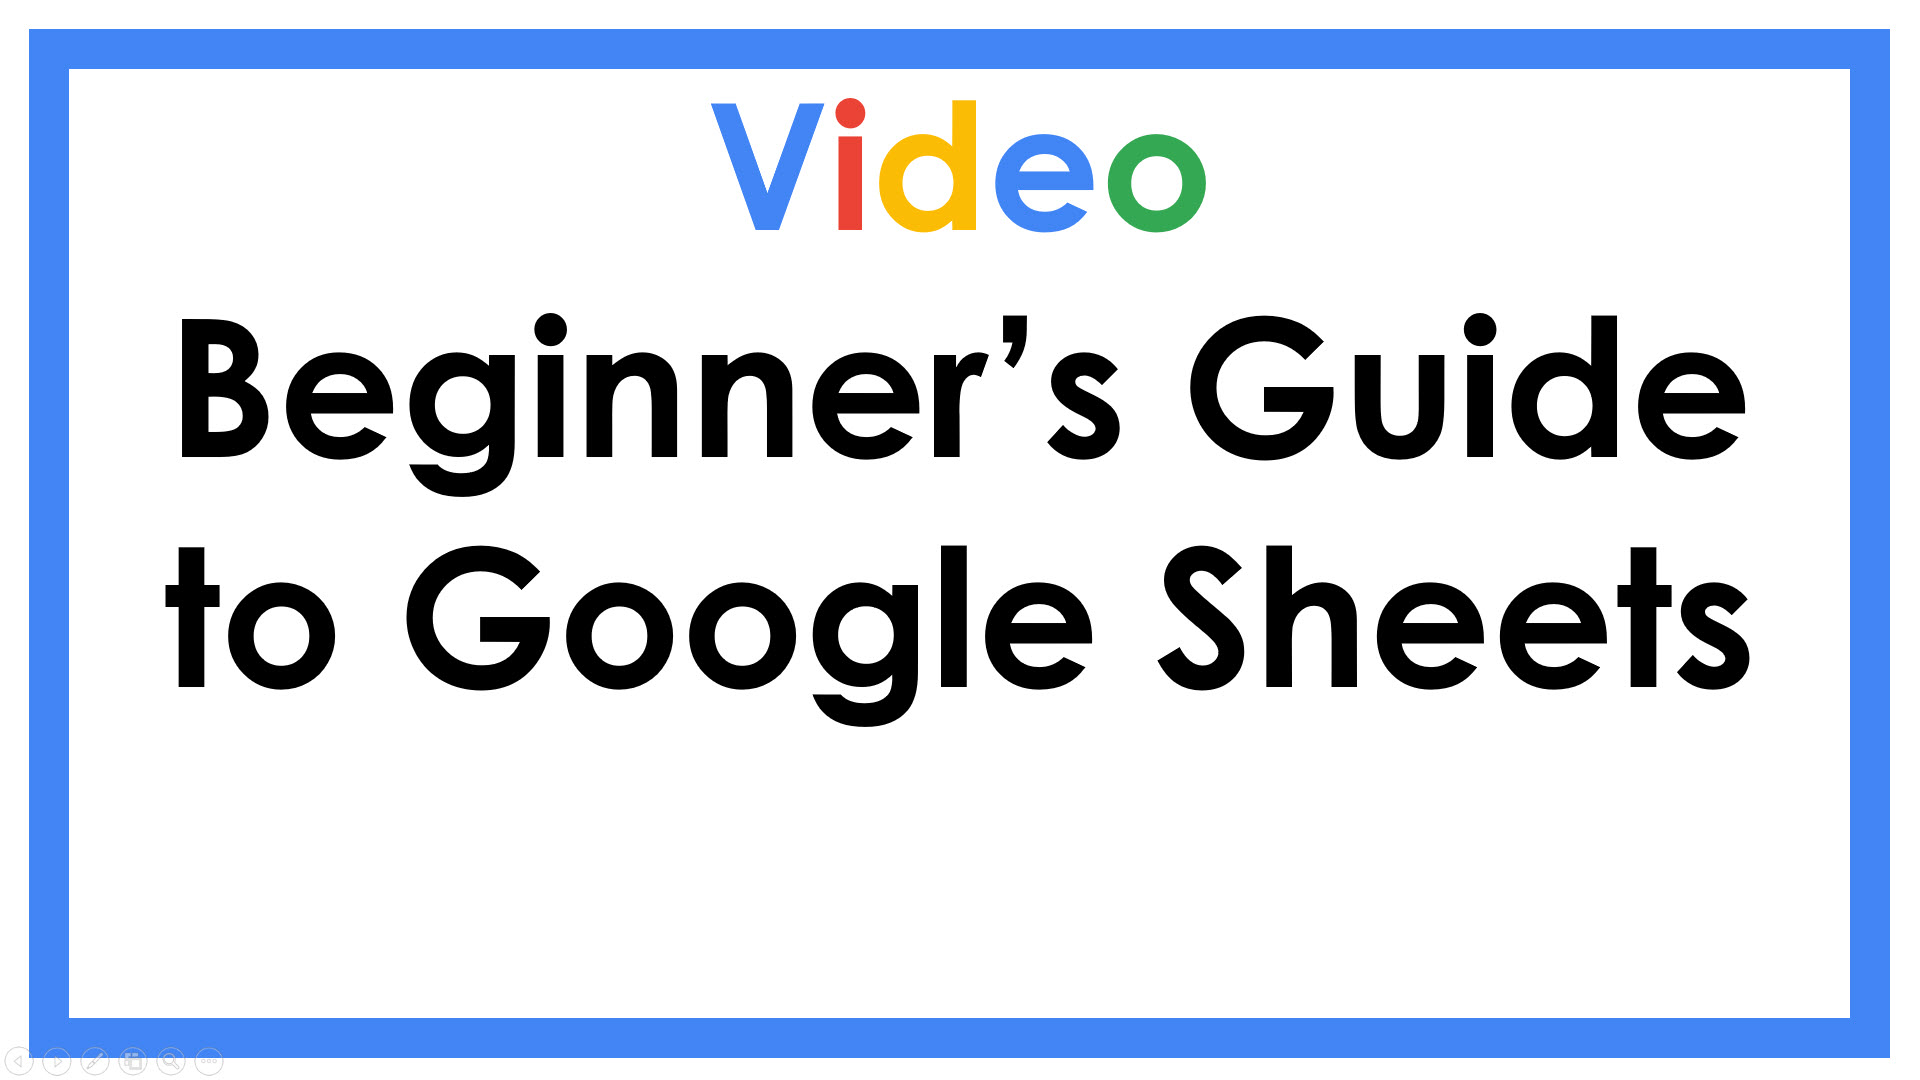 Beginner's Guide to Google Sheets